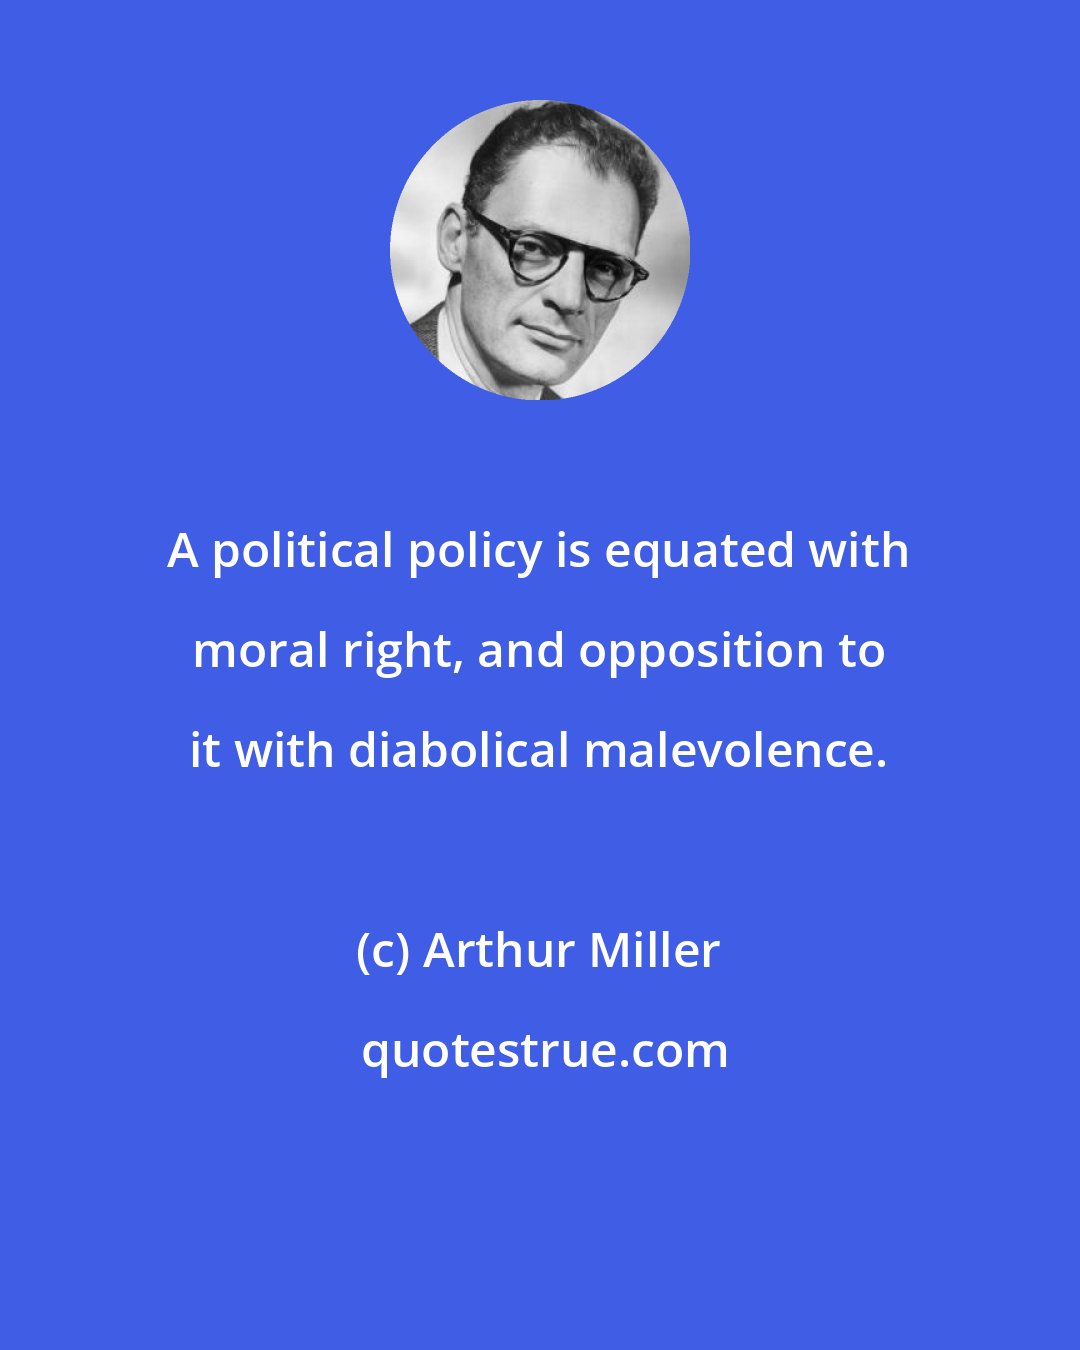 Arthur Miller: A political policy is equated with moral right, and opposition to it with diabolical malevolence.